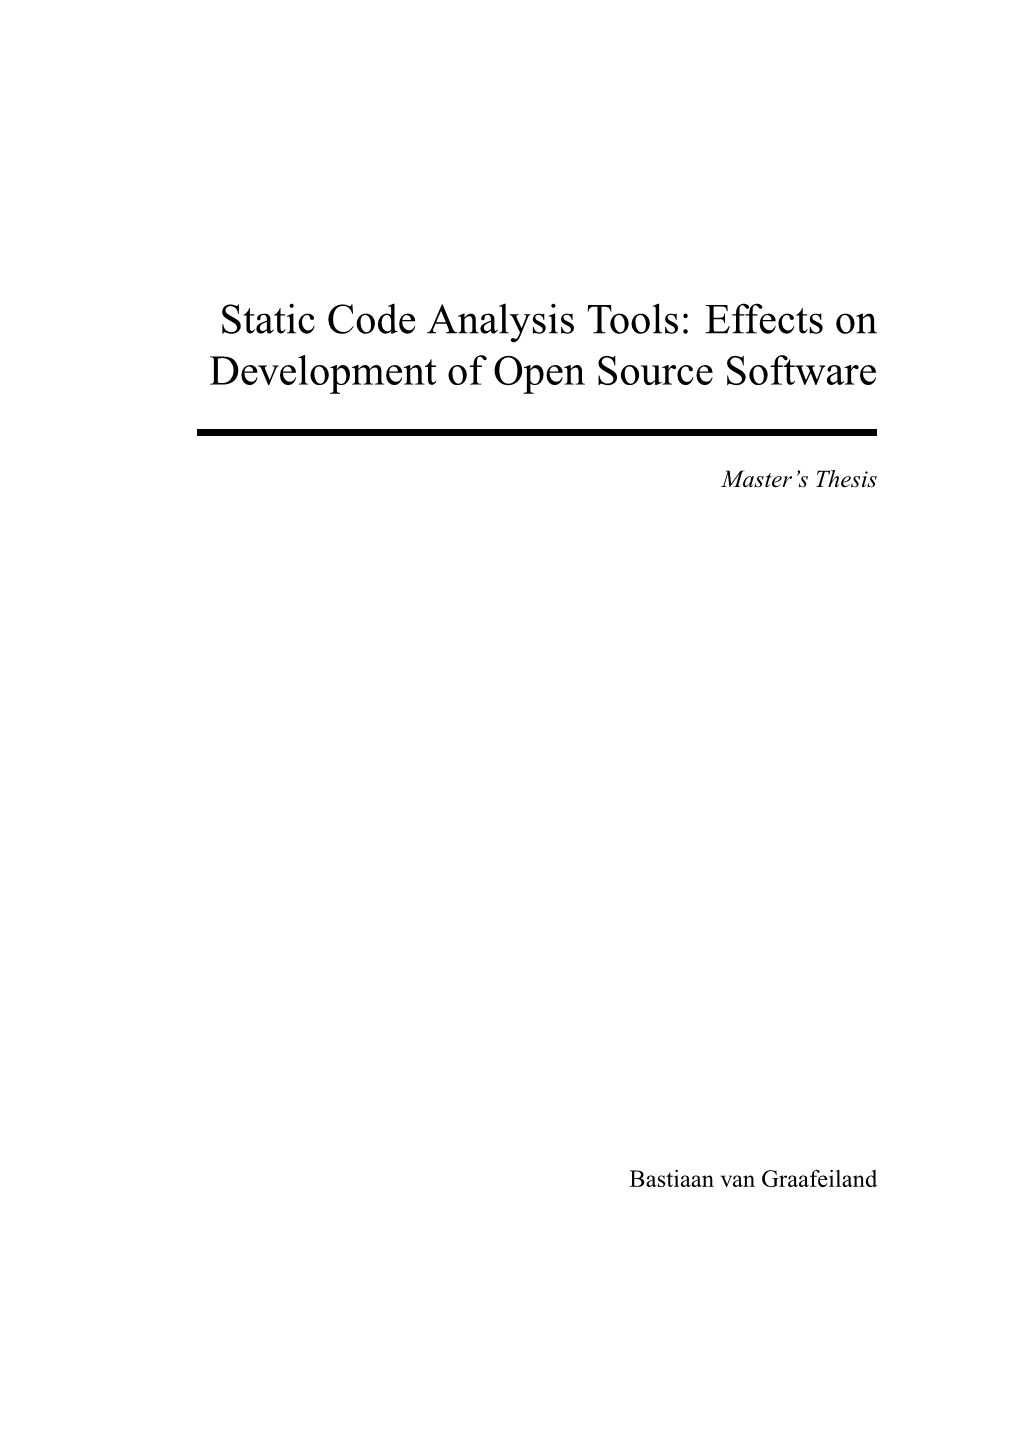 Effects on Development of Open Source Software